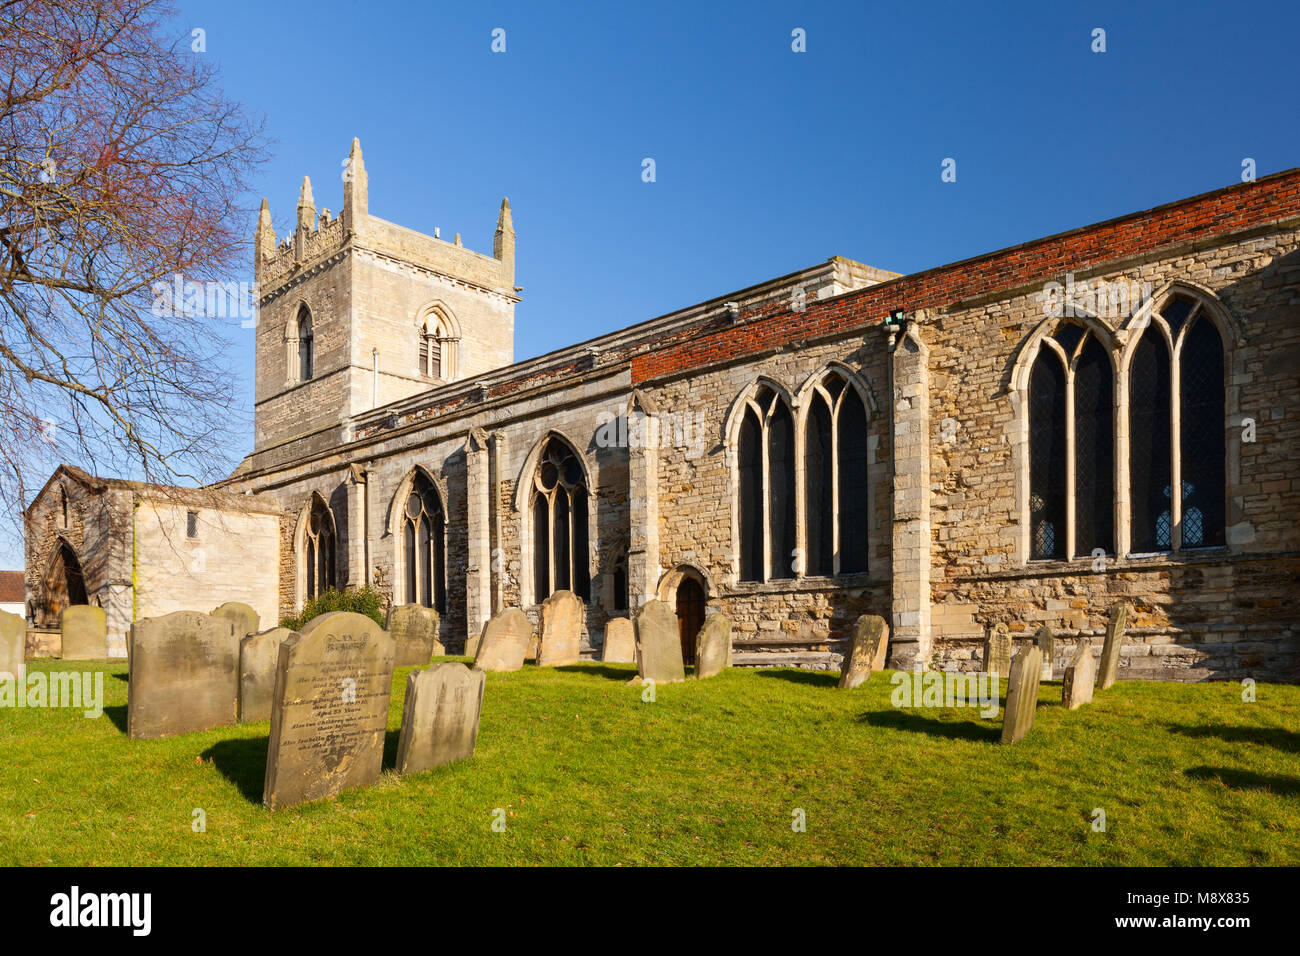 Barton-upon-Humber. 21st March, 2018. UK Weather: A calm and bright, but cold, morning at the Parish Church of St. Mary in Barton-upon-Humber, North Lincolnshire, UK. 21st March 2018. Credit: LEE BEEL/Alamy Live News Stock Photo